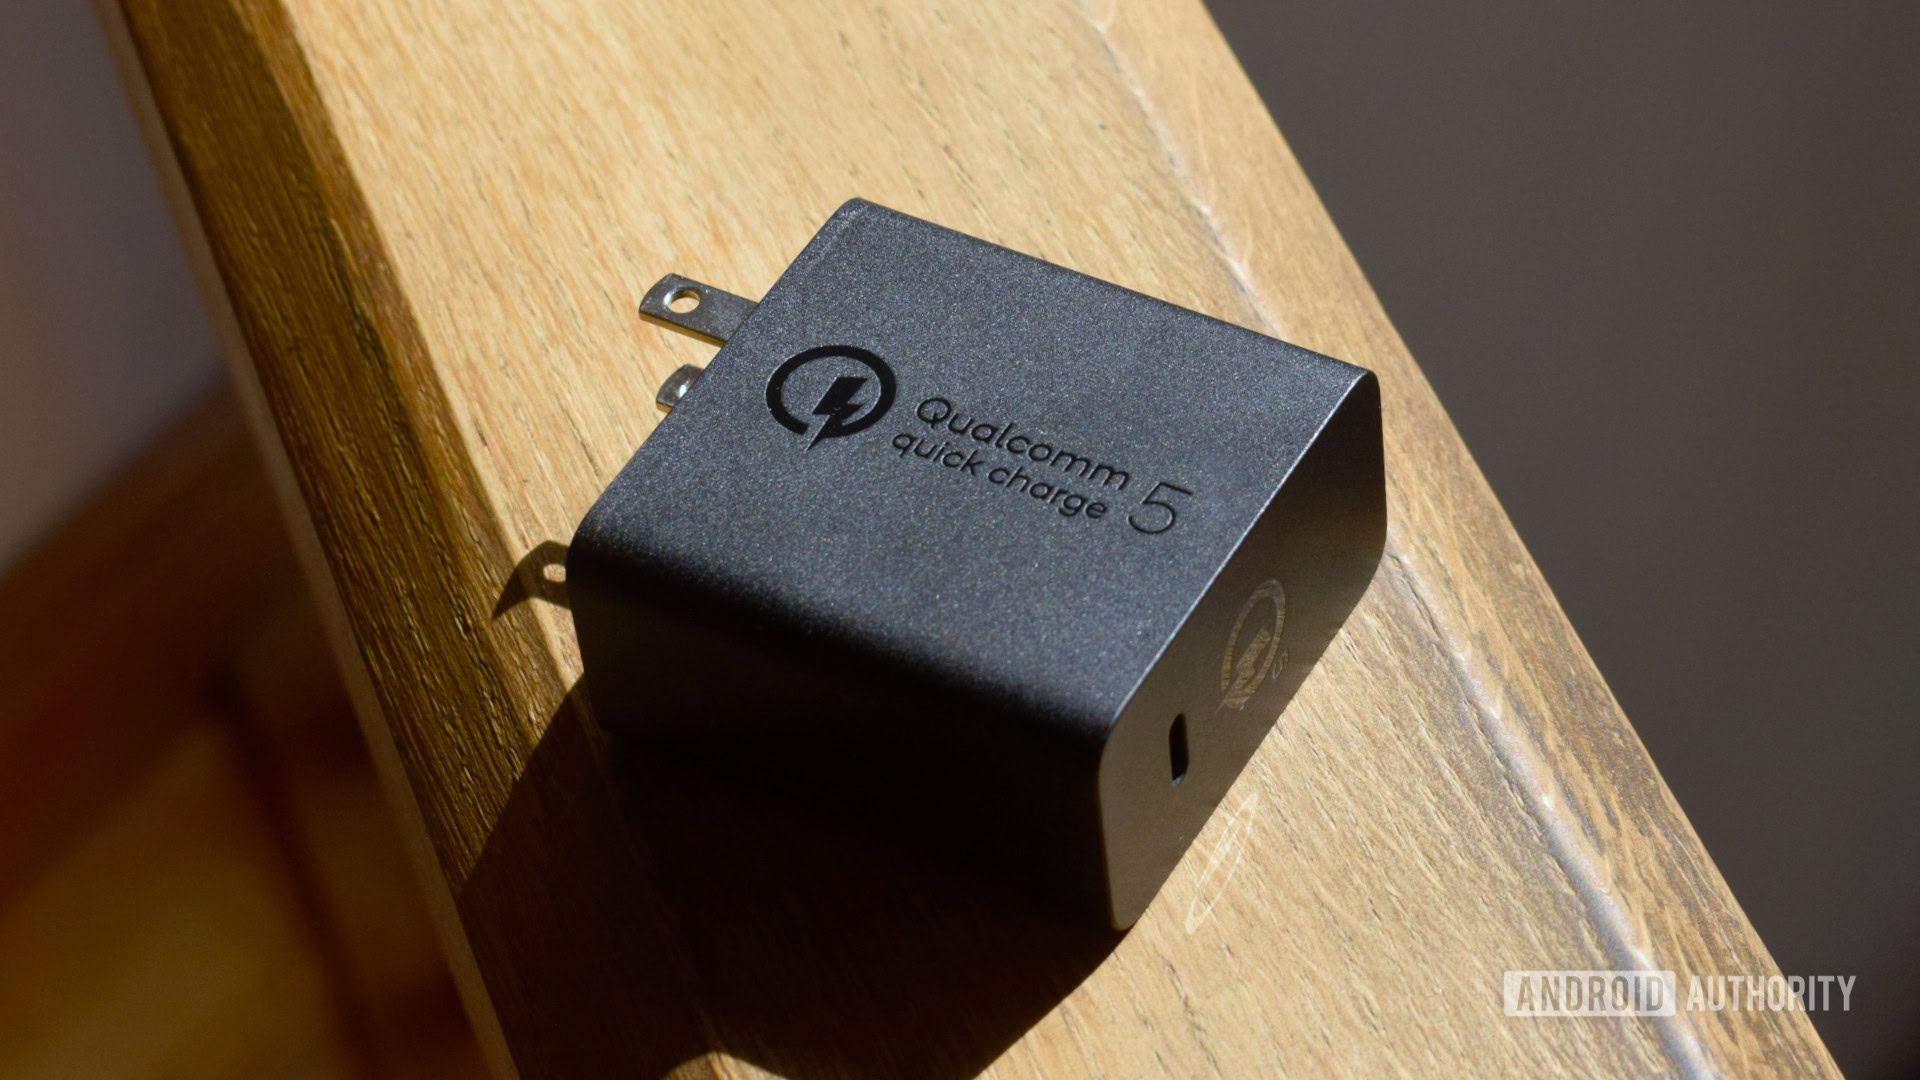 https://www.androidauthority.com/wp-content/uploads/2021/07/Qualcomm-Quick-Charge-5-charger-3.jpg